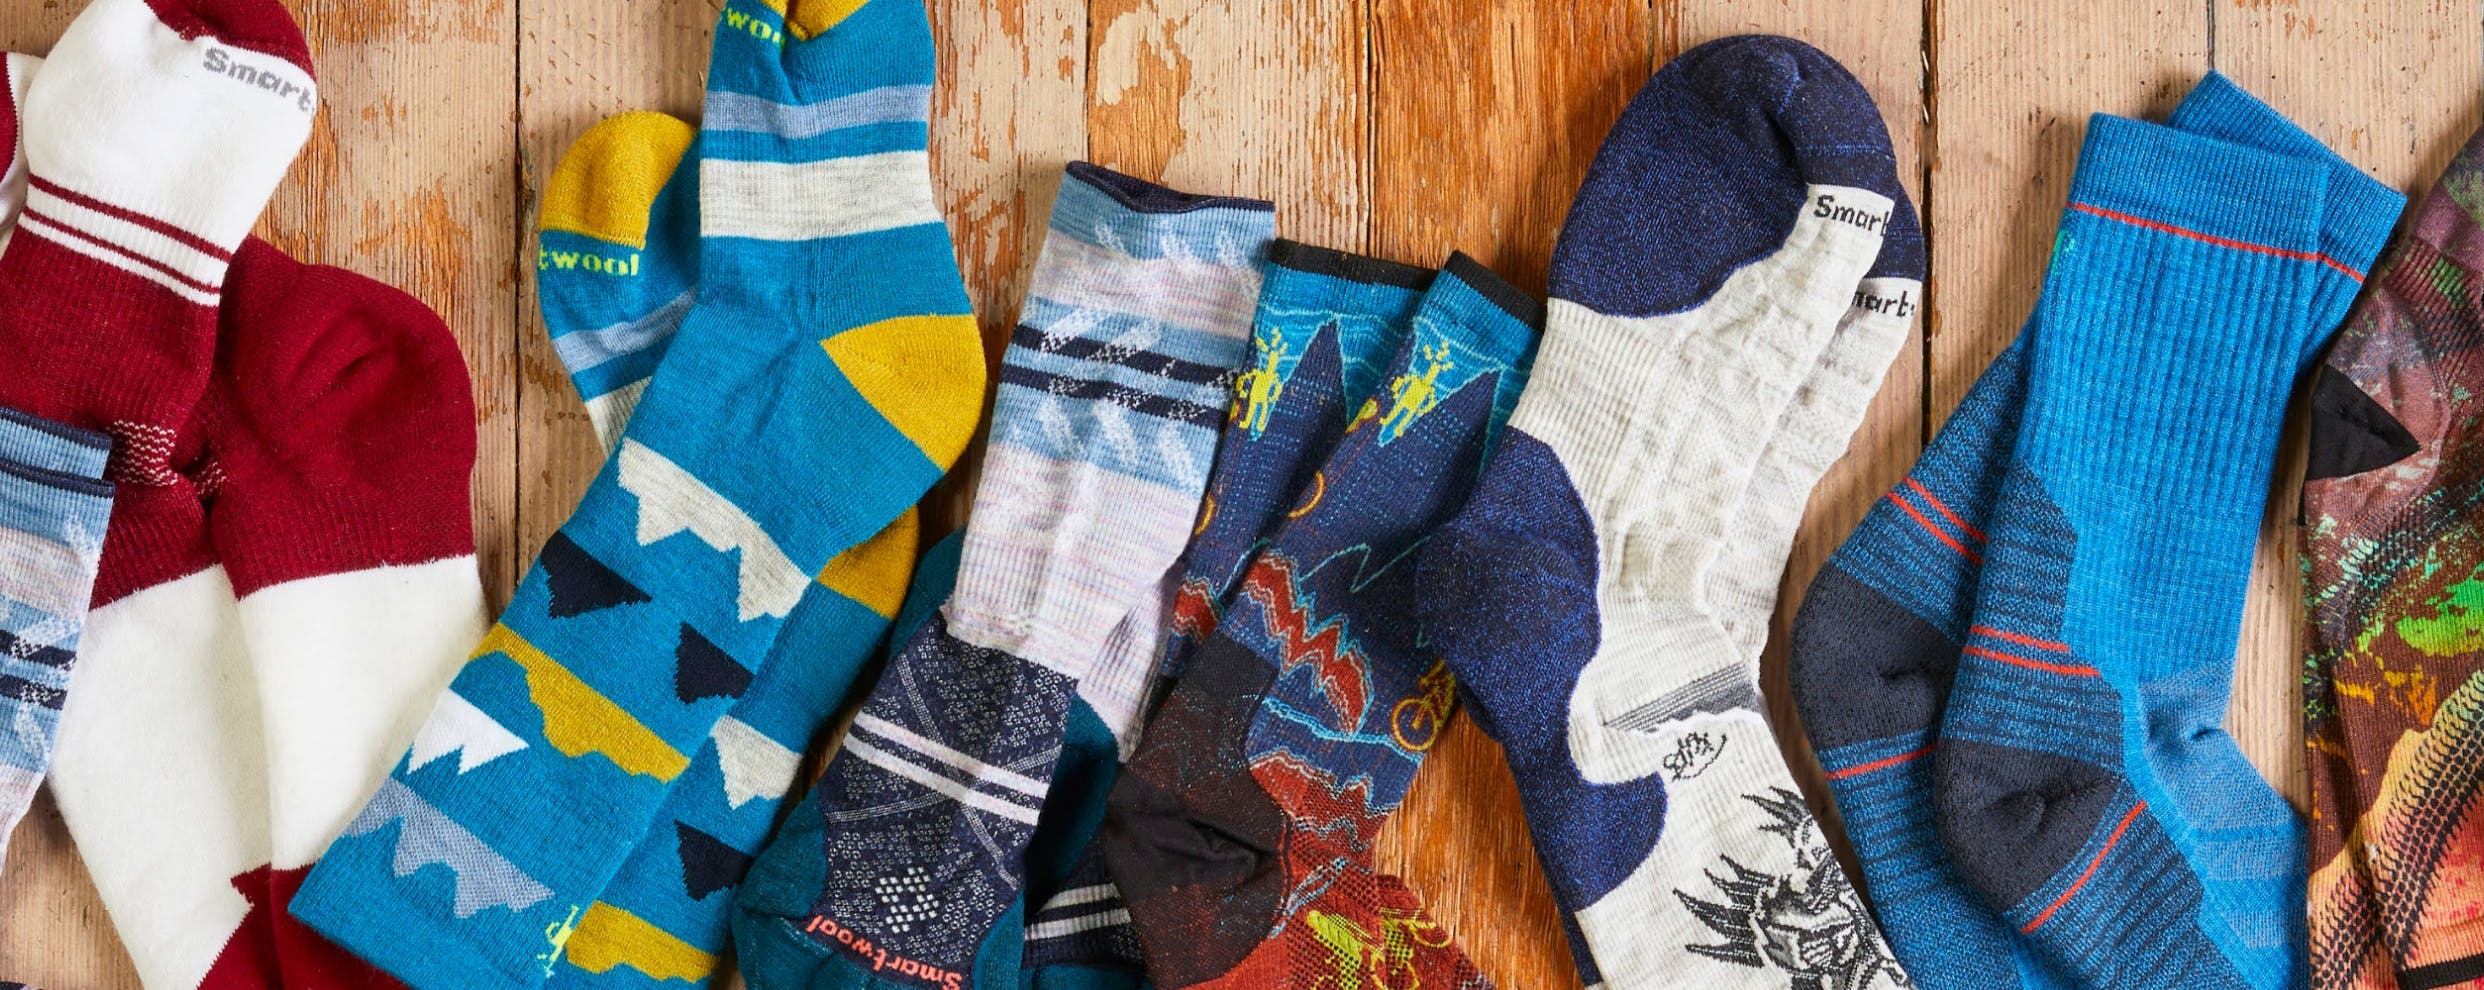 Fresh pair of shoes? Match ‘em with new socks for any activity.